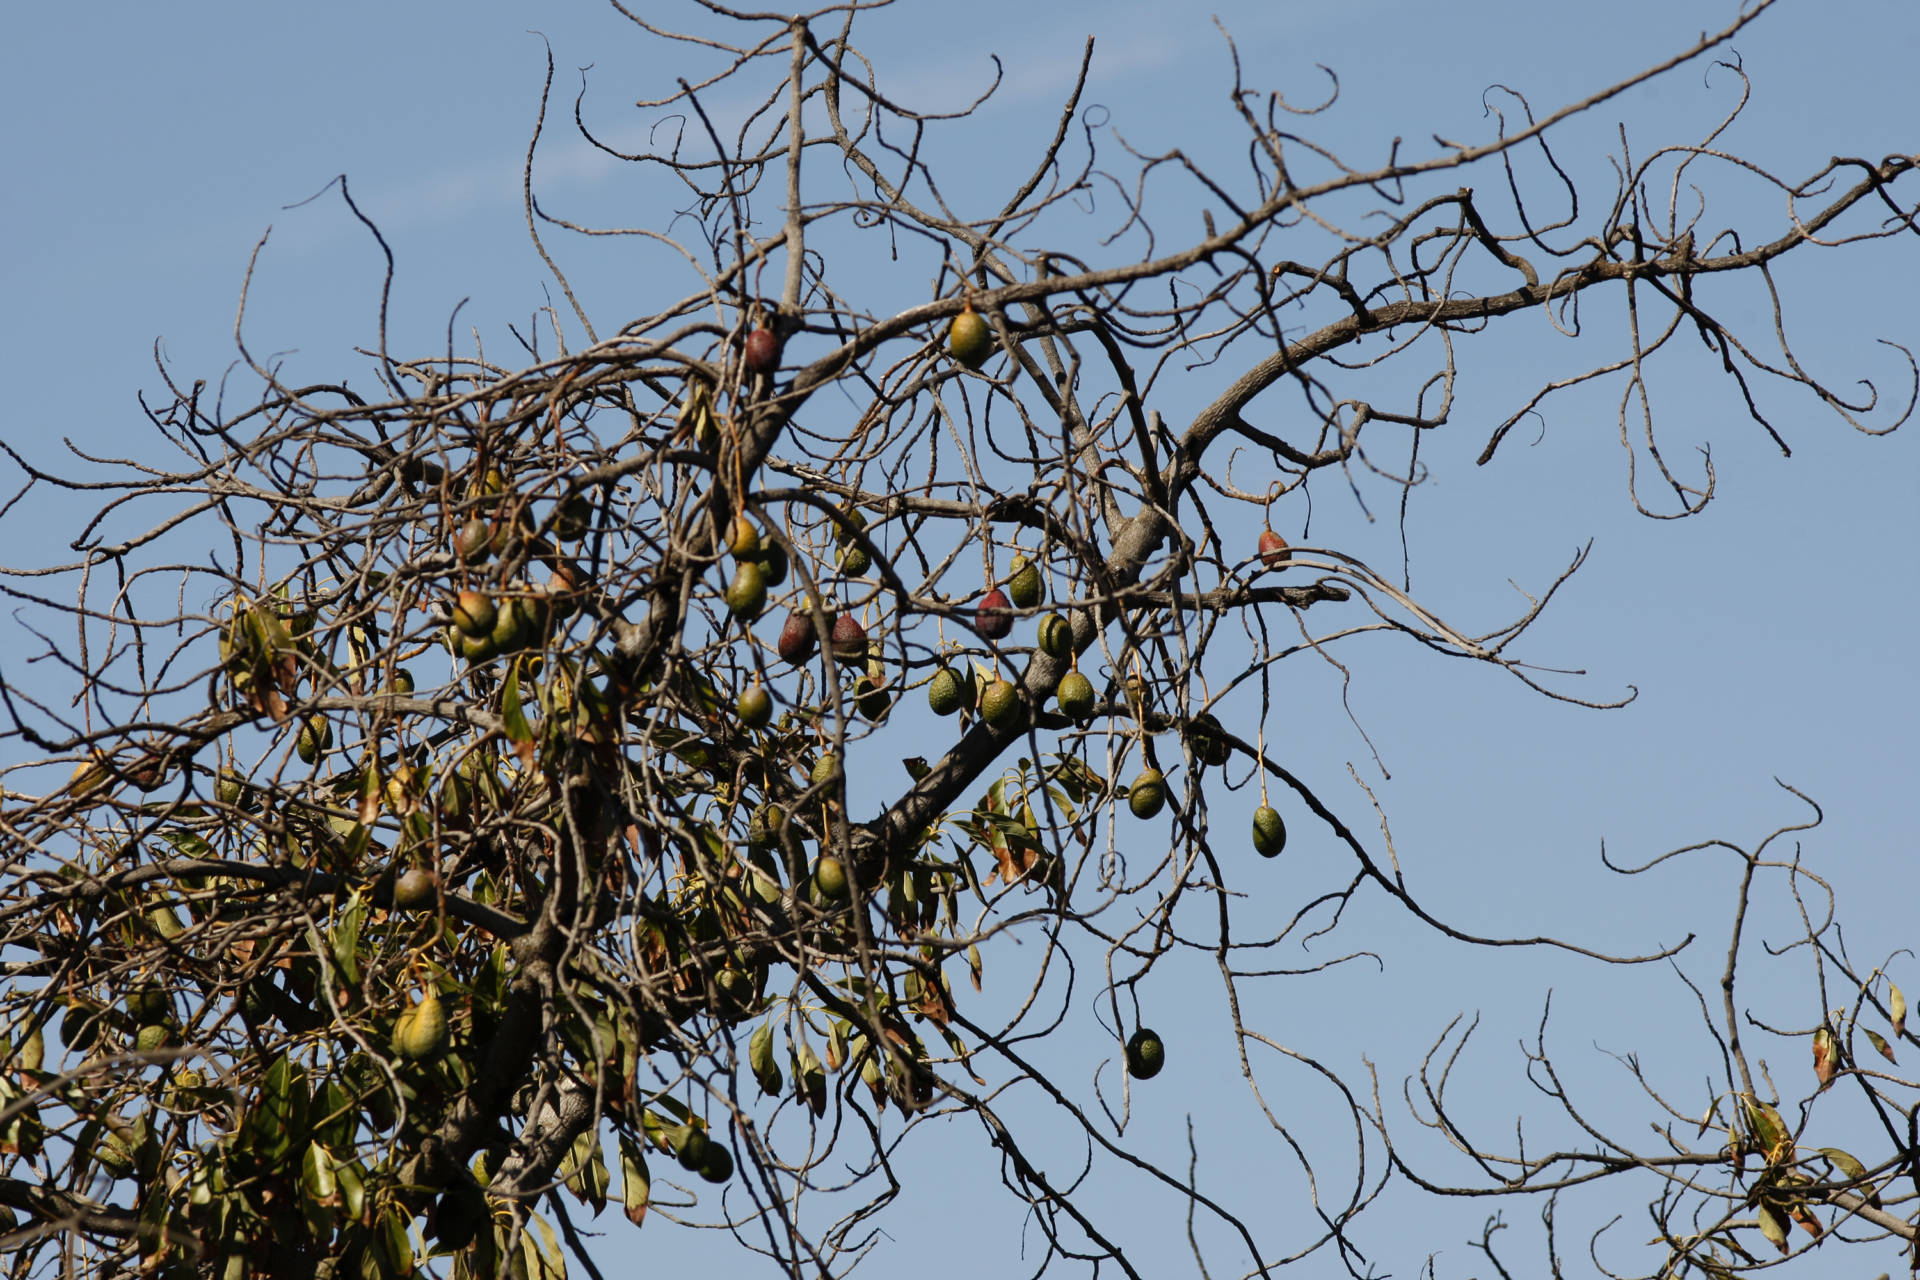 Avocados hang from a dying tree on March 5, 2014 near Valley Center, California.  David McNew/Getty Images